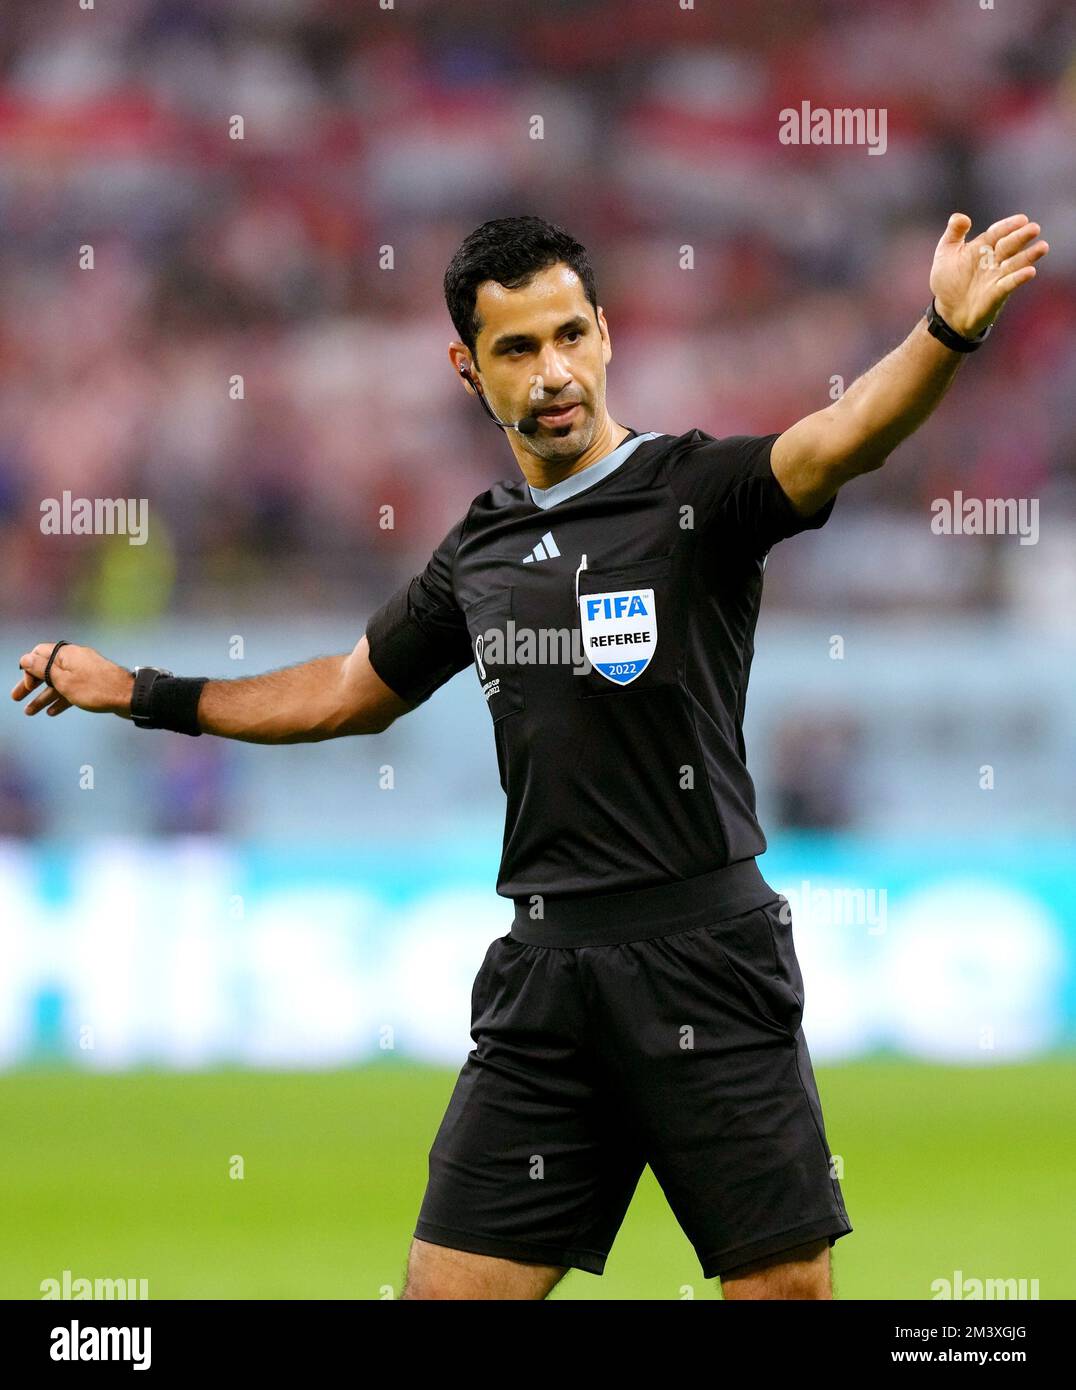 Referee Abdulrahman Al-Jassim during the FIFA World Cup third place play-off match at the Khalifa International Stadium, Doha. Picture date: Saturday December 17, 2022. Stock Photo